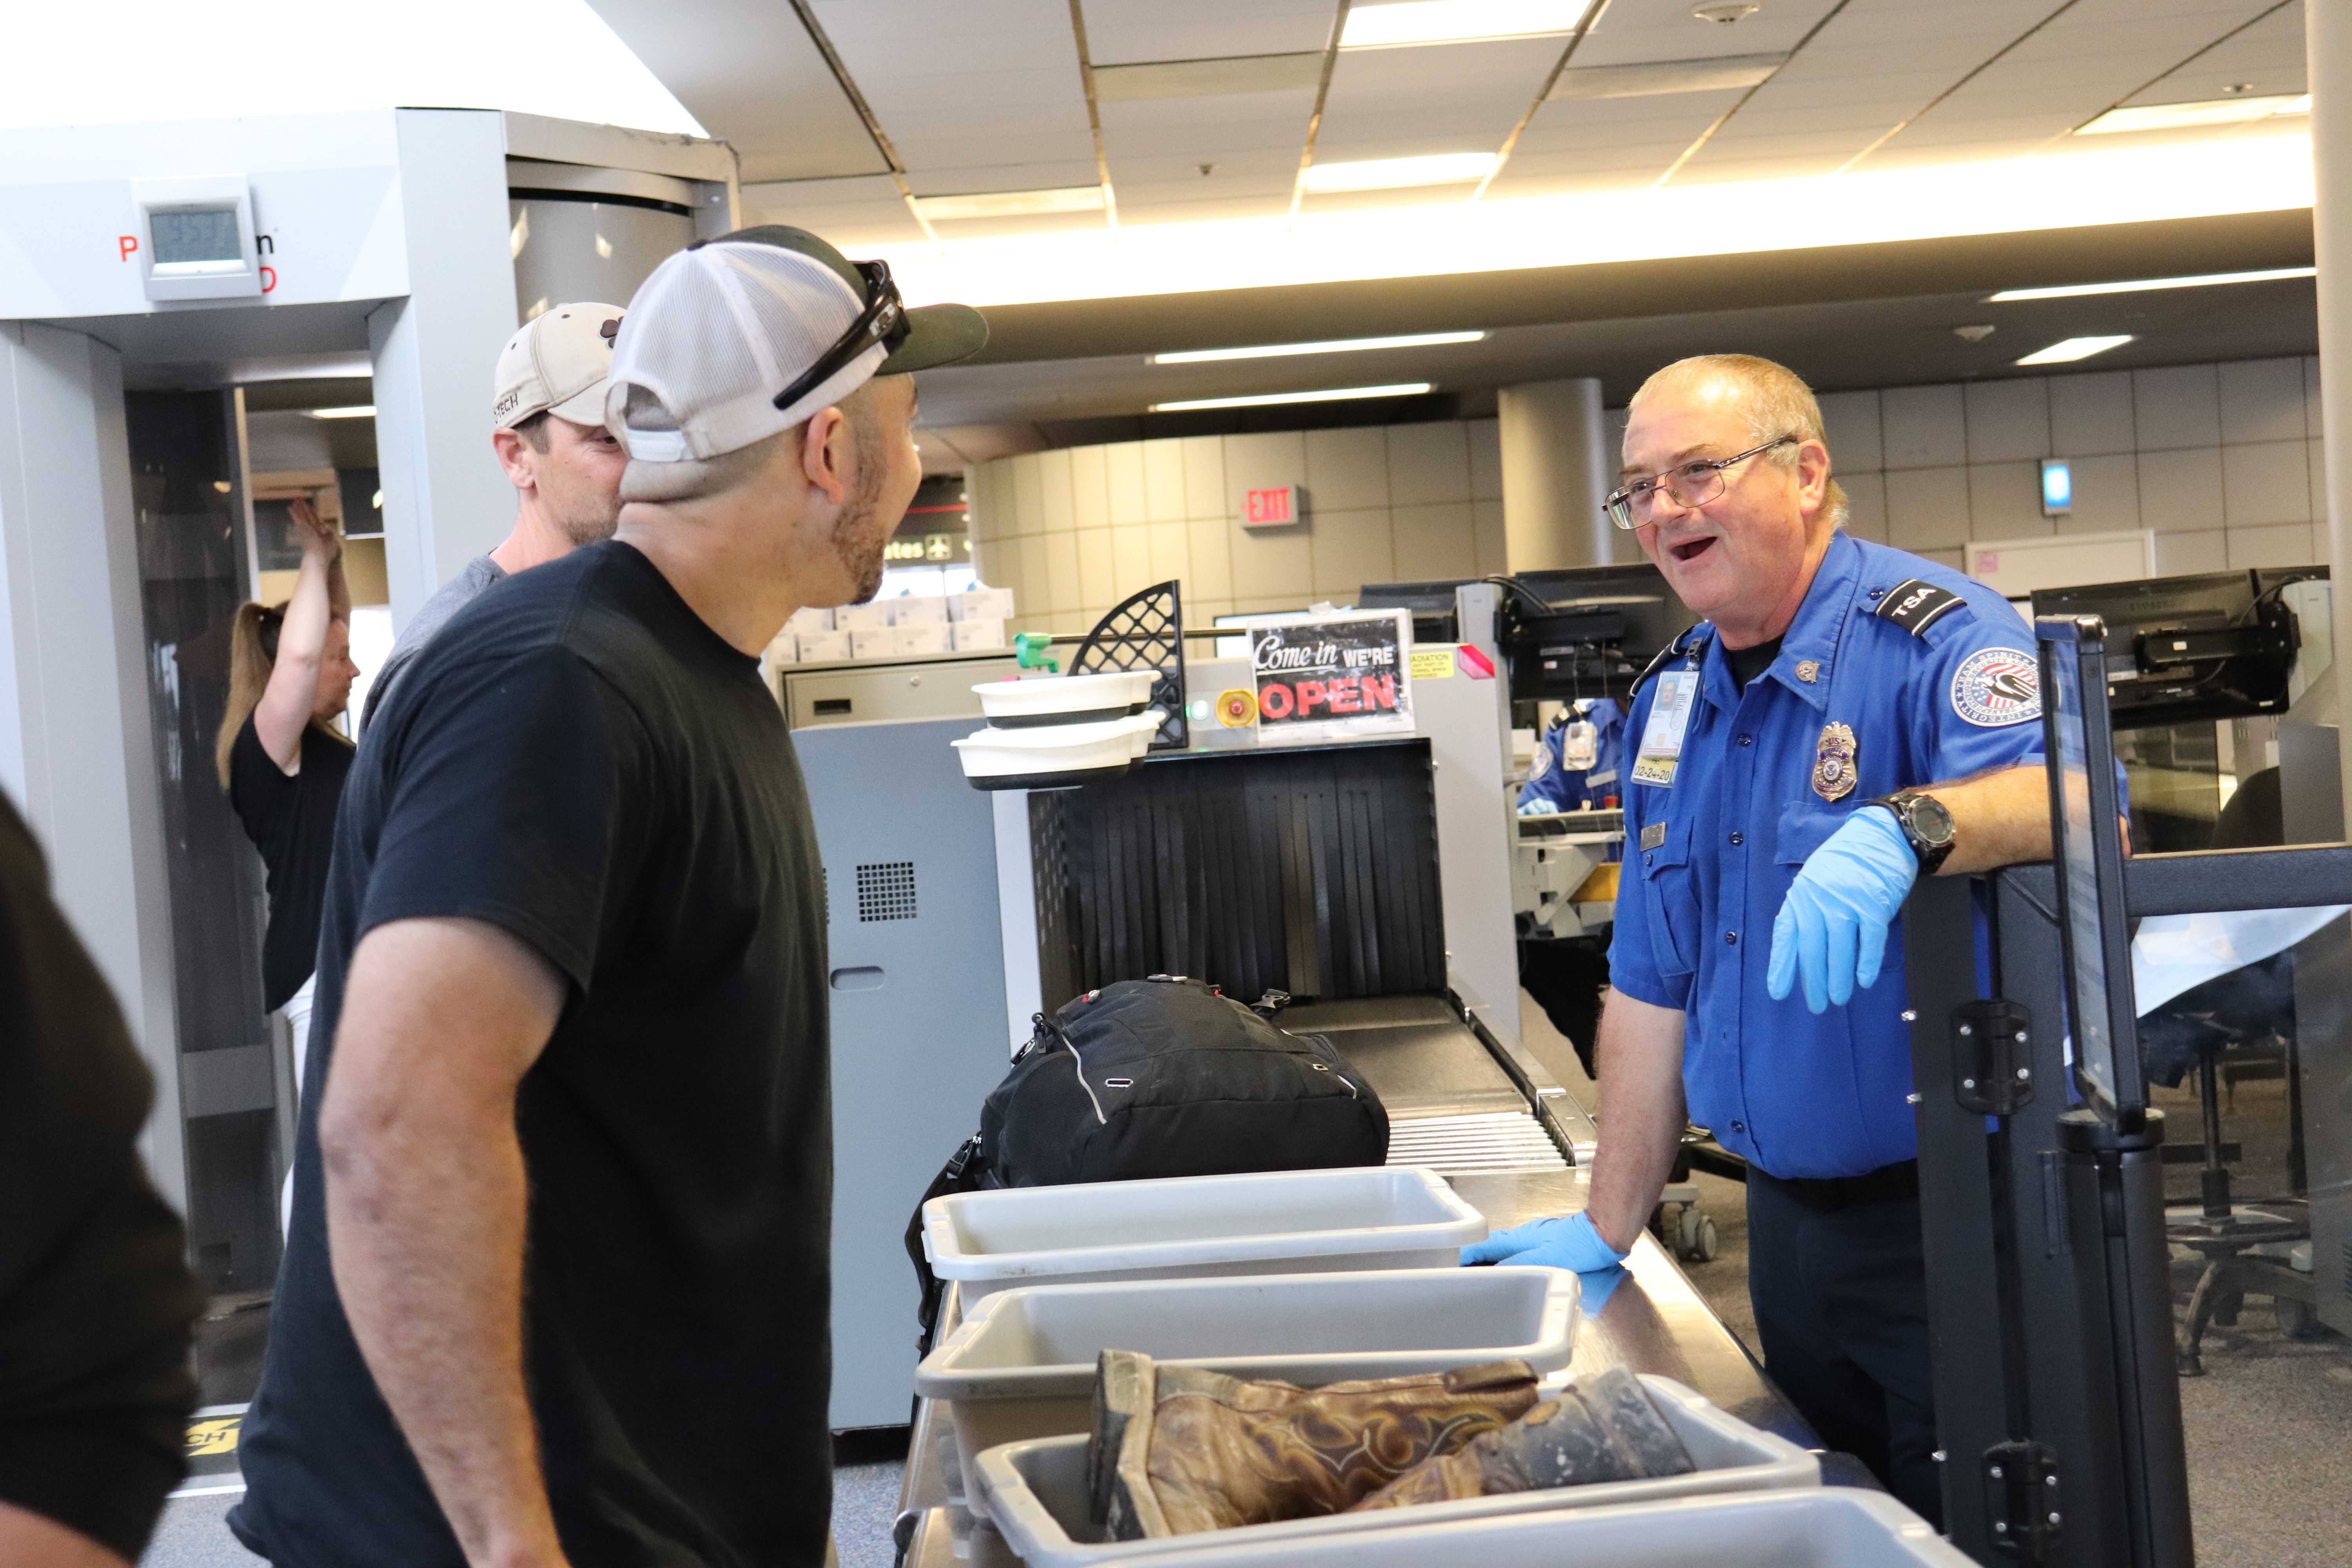 TSA officers offer helpful guidance to passengers at security checkpoints. (TSA photo)